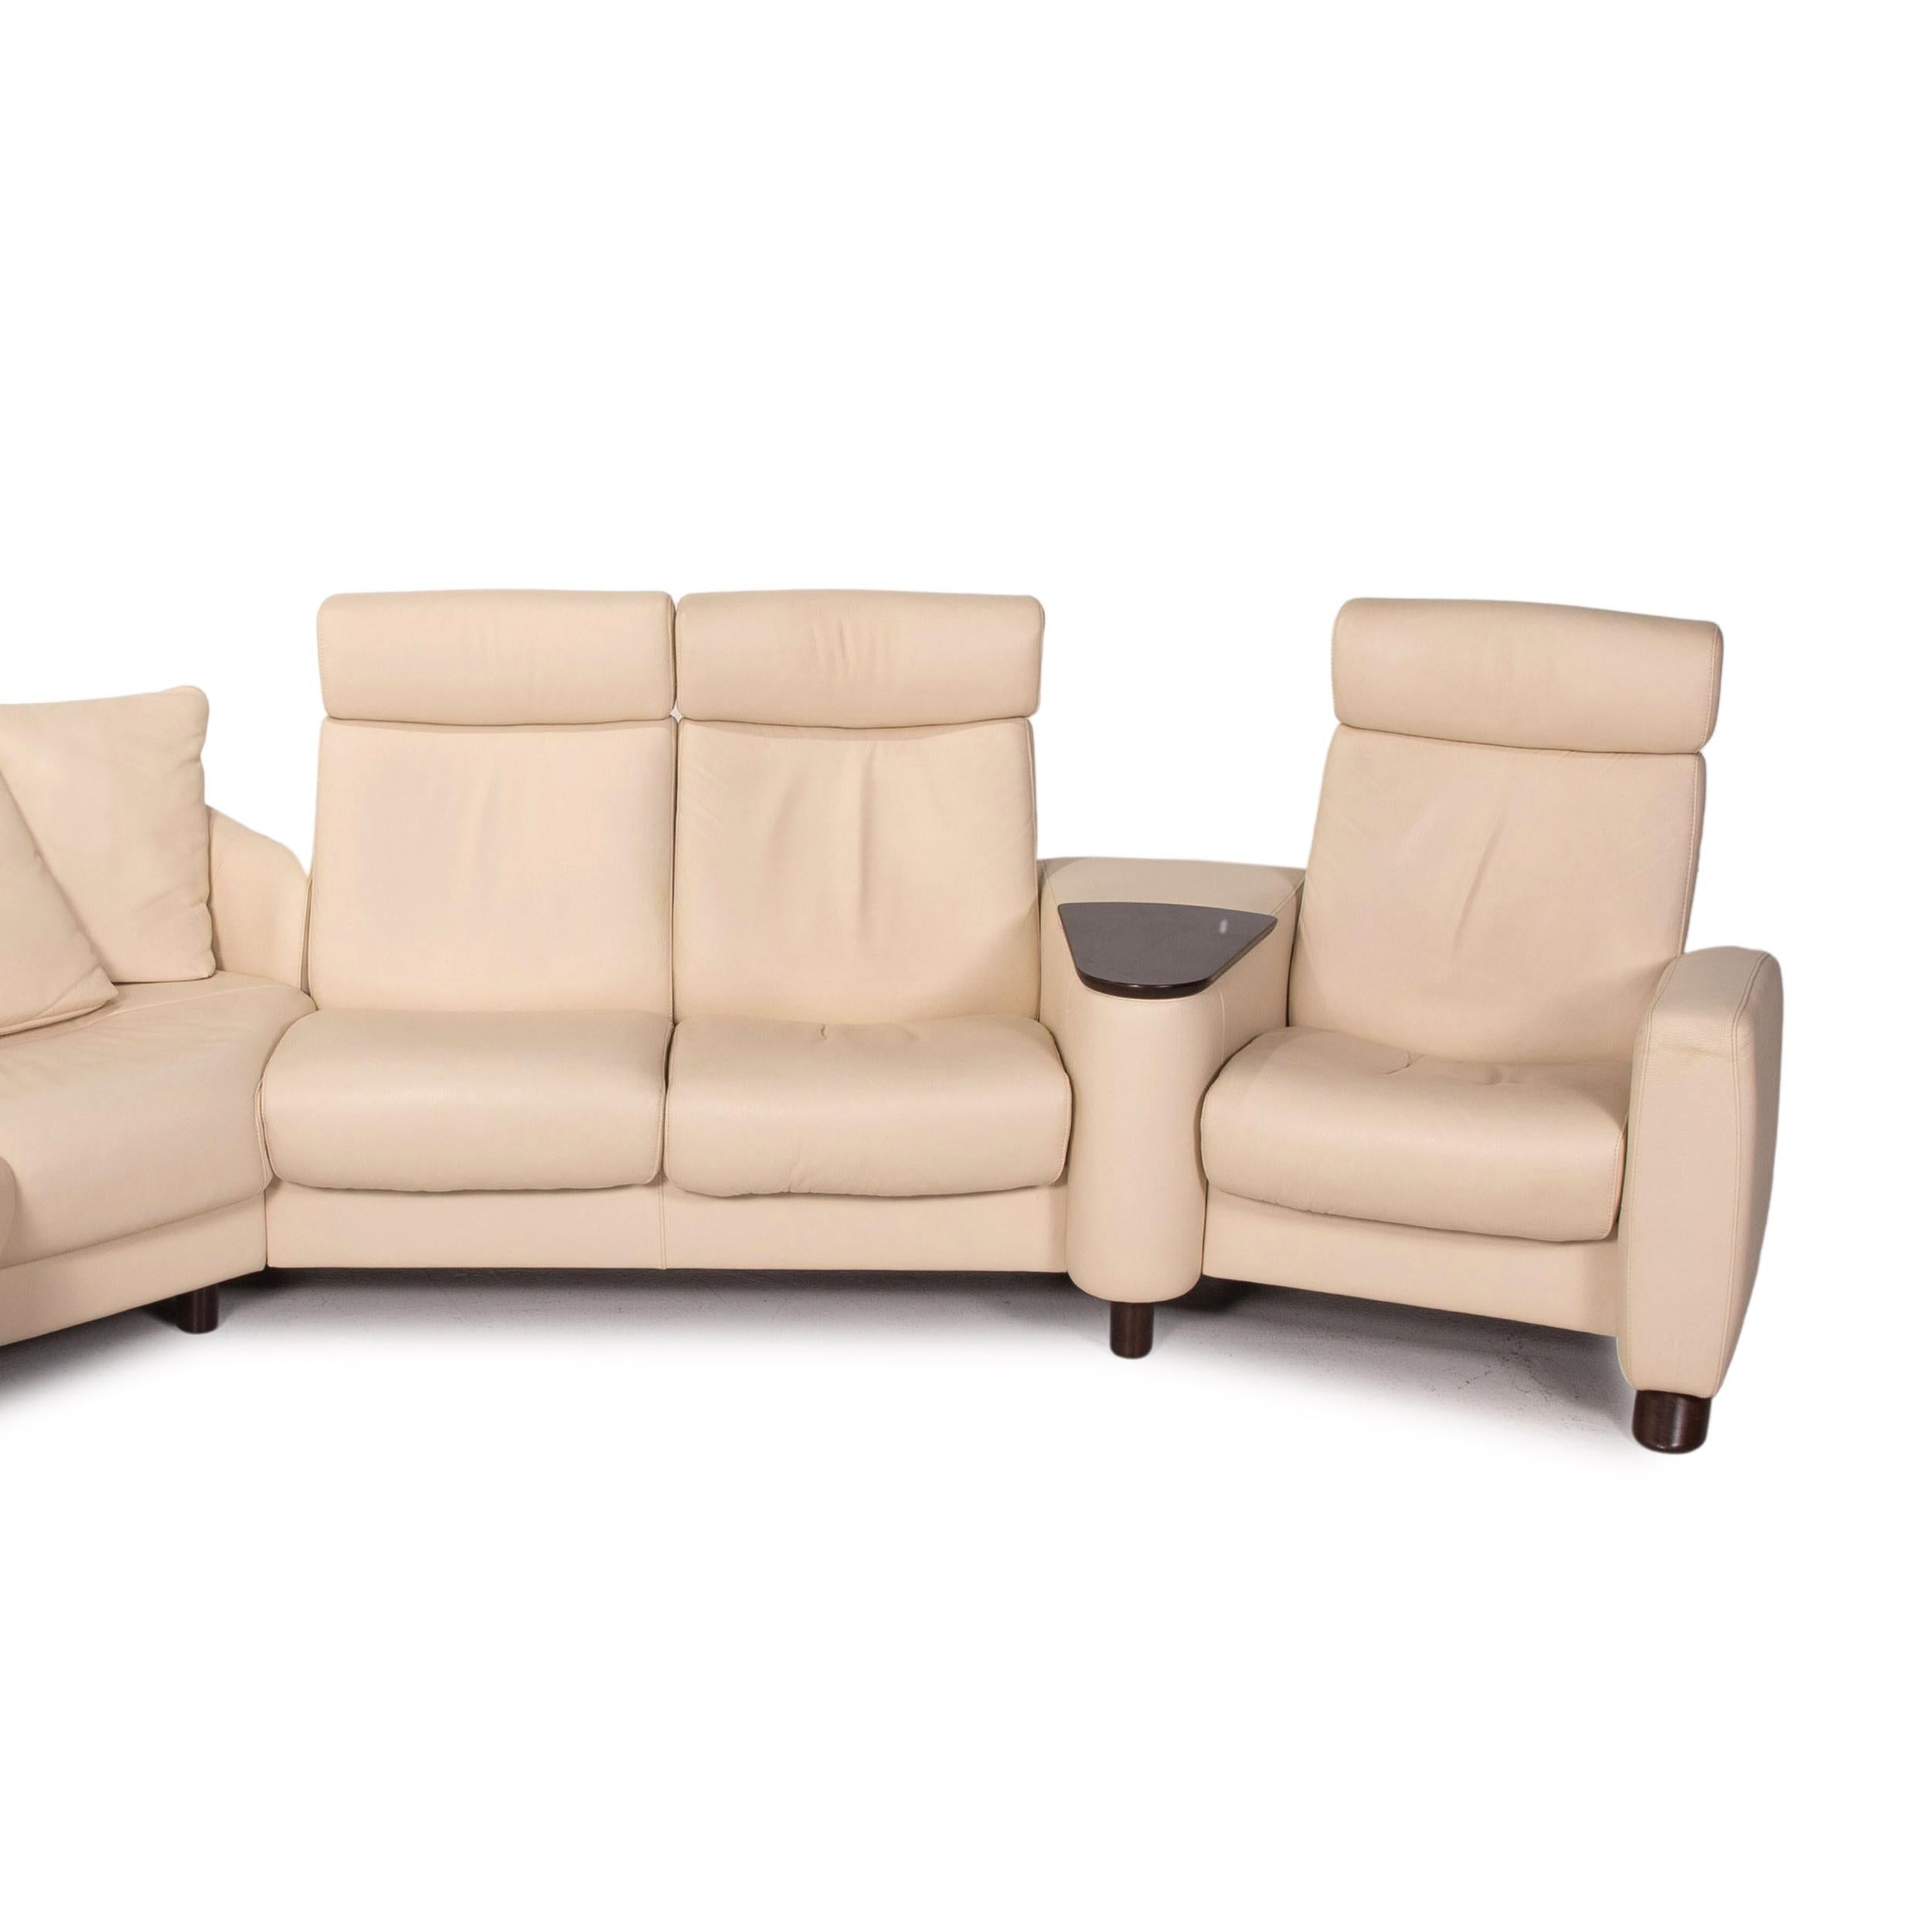 Stressless Arion Leather Corner Sofa Cream Relax Function Sofa Couch For Sale 3